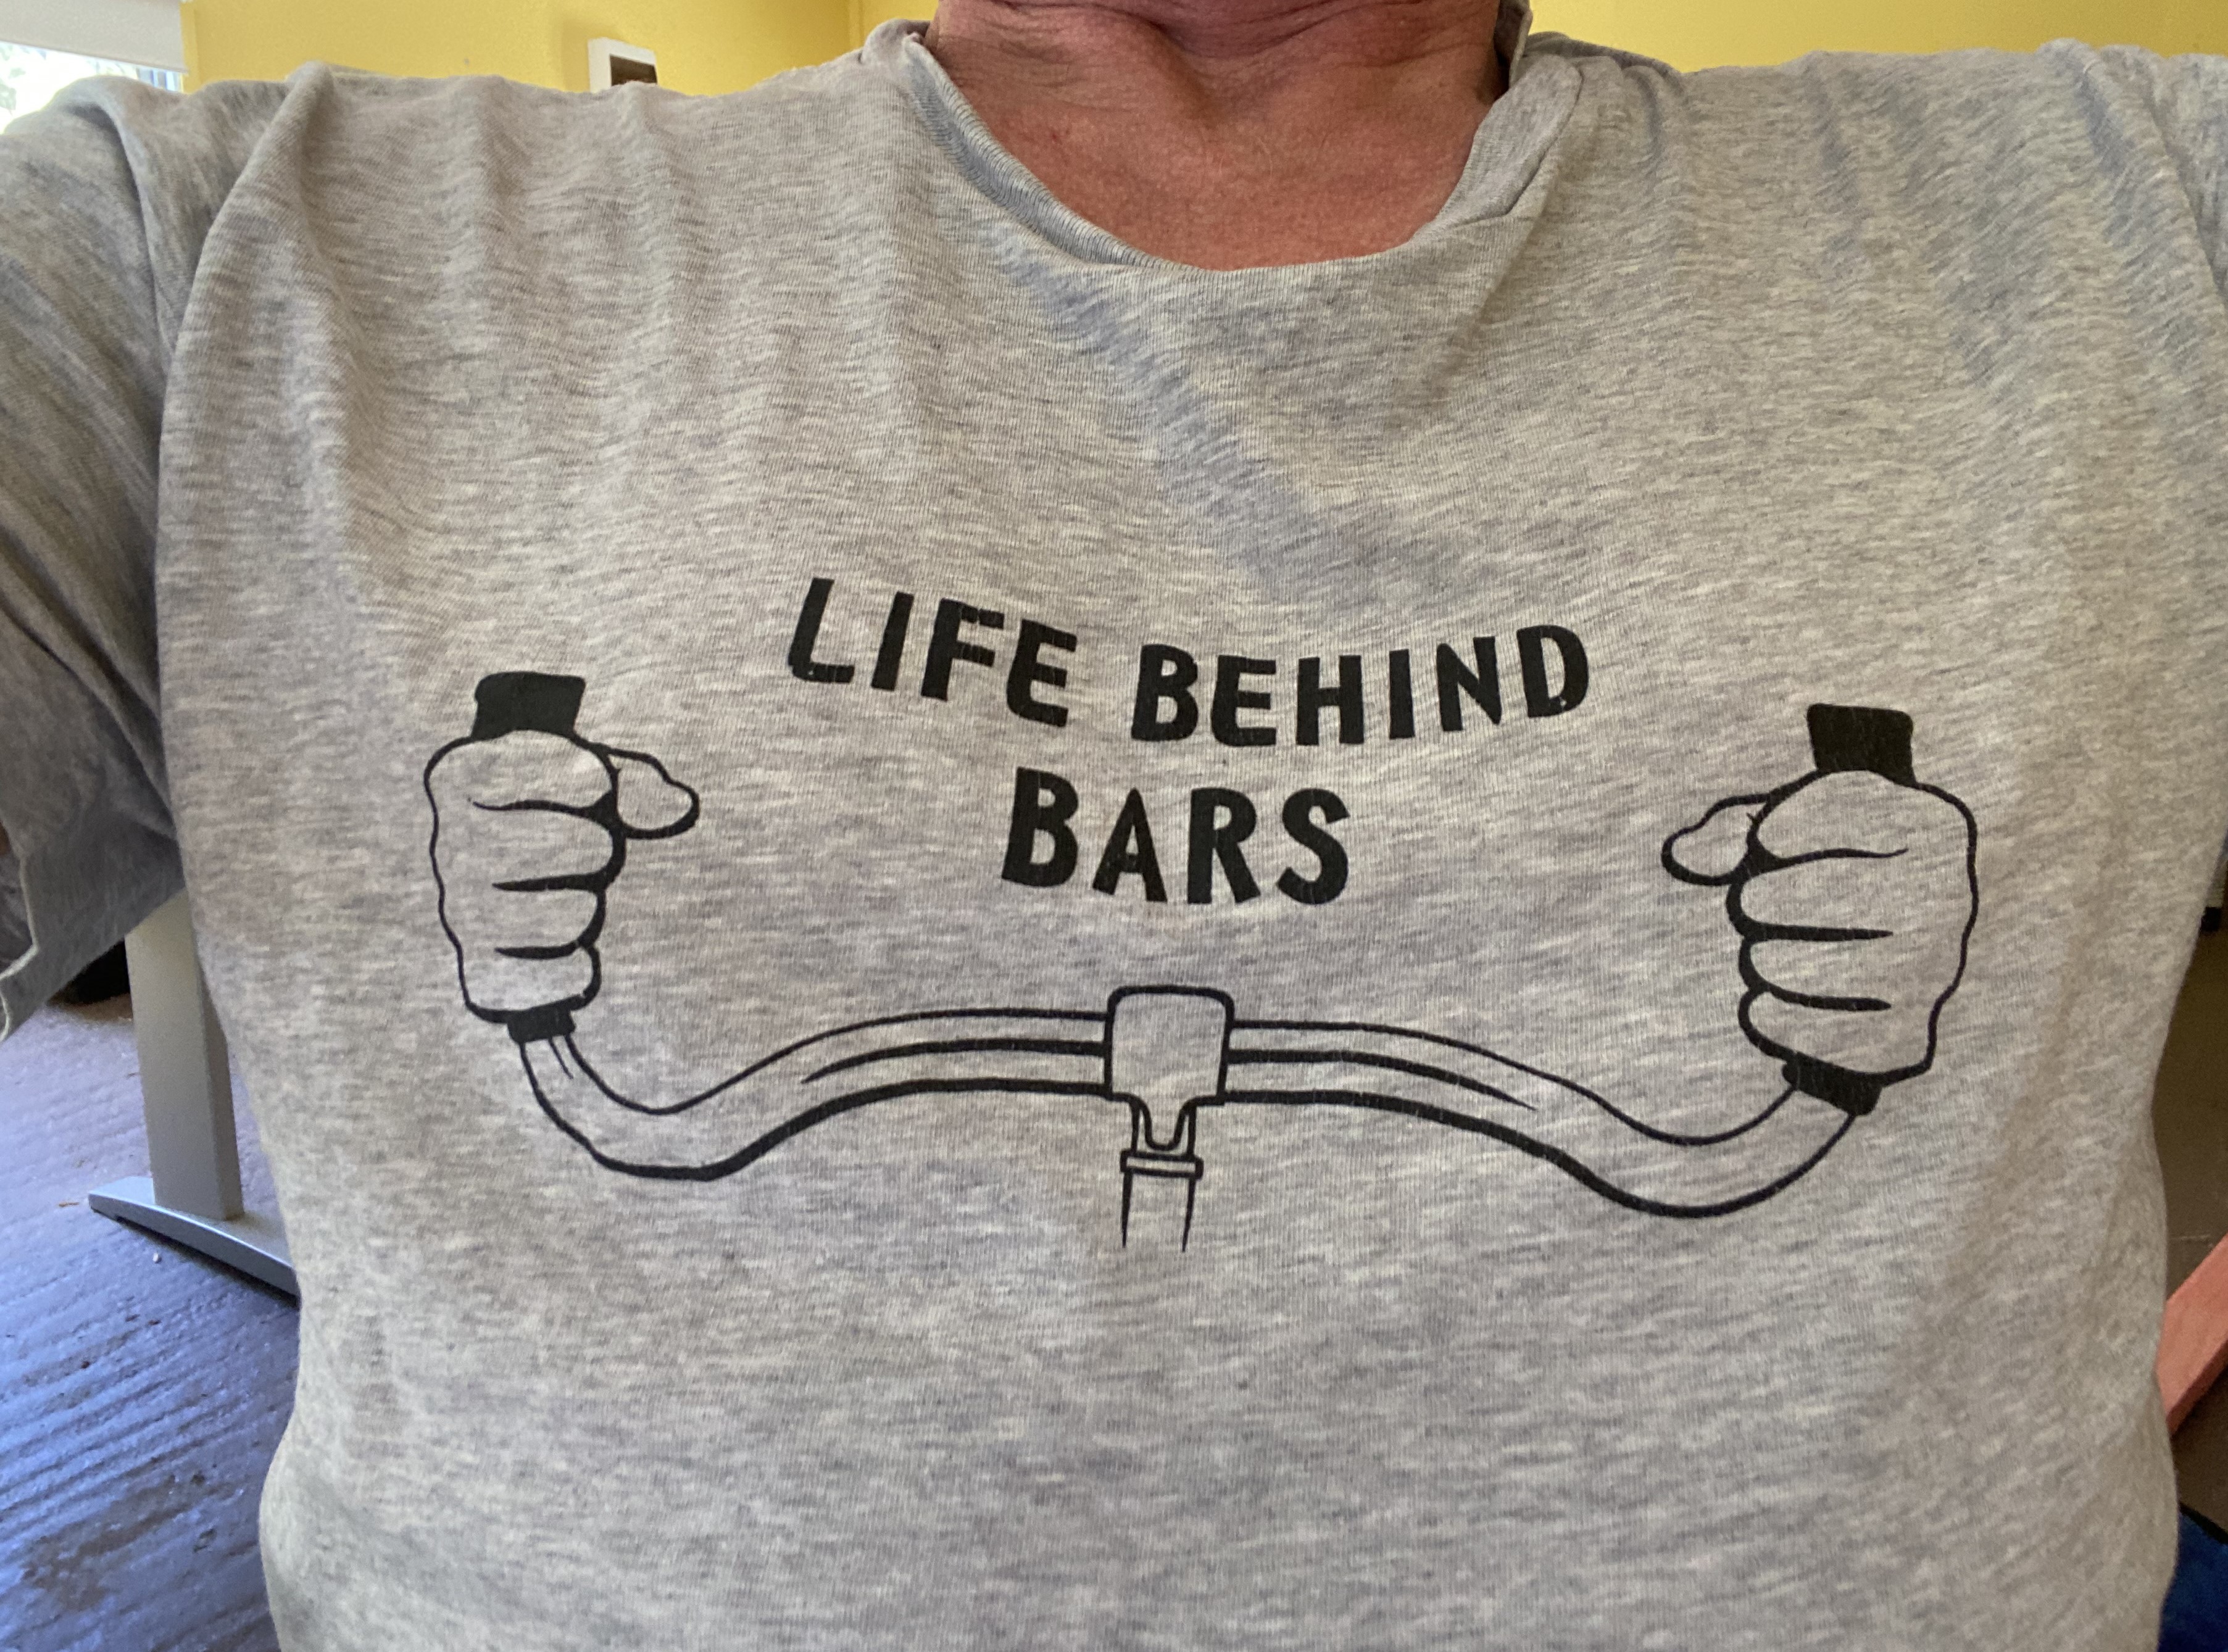 Axel's tshirt, showing a drawing of bicycle handlebars with the caption 'life behind bars'